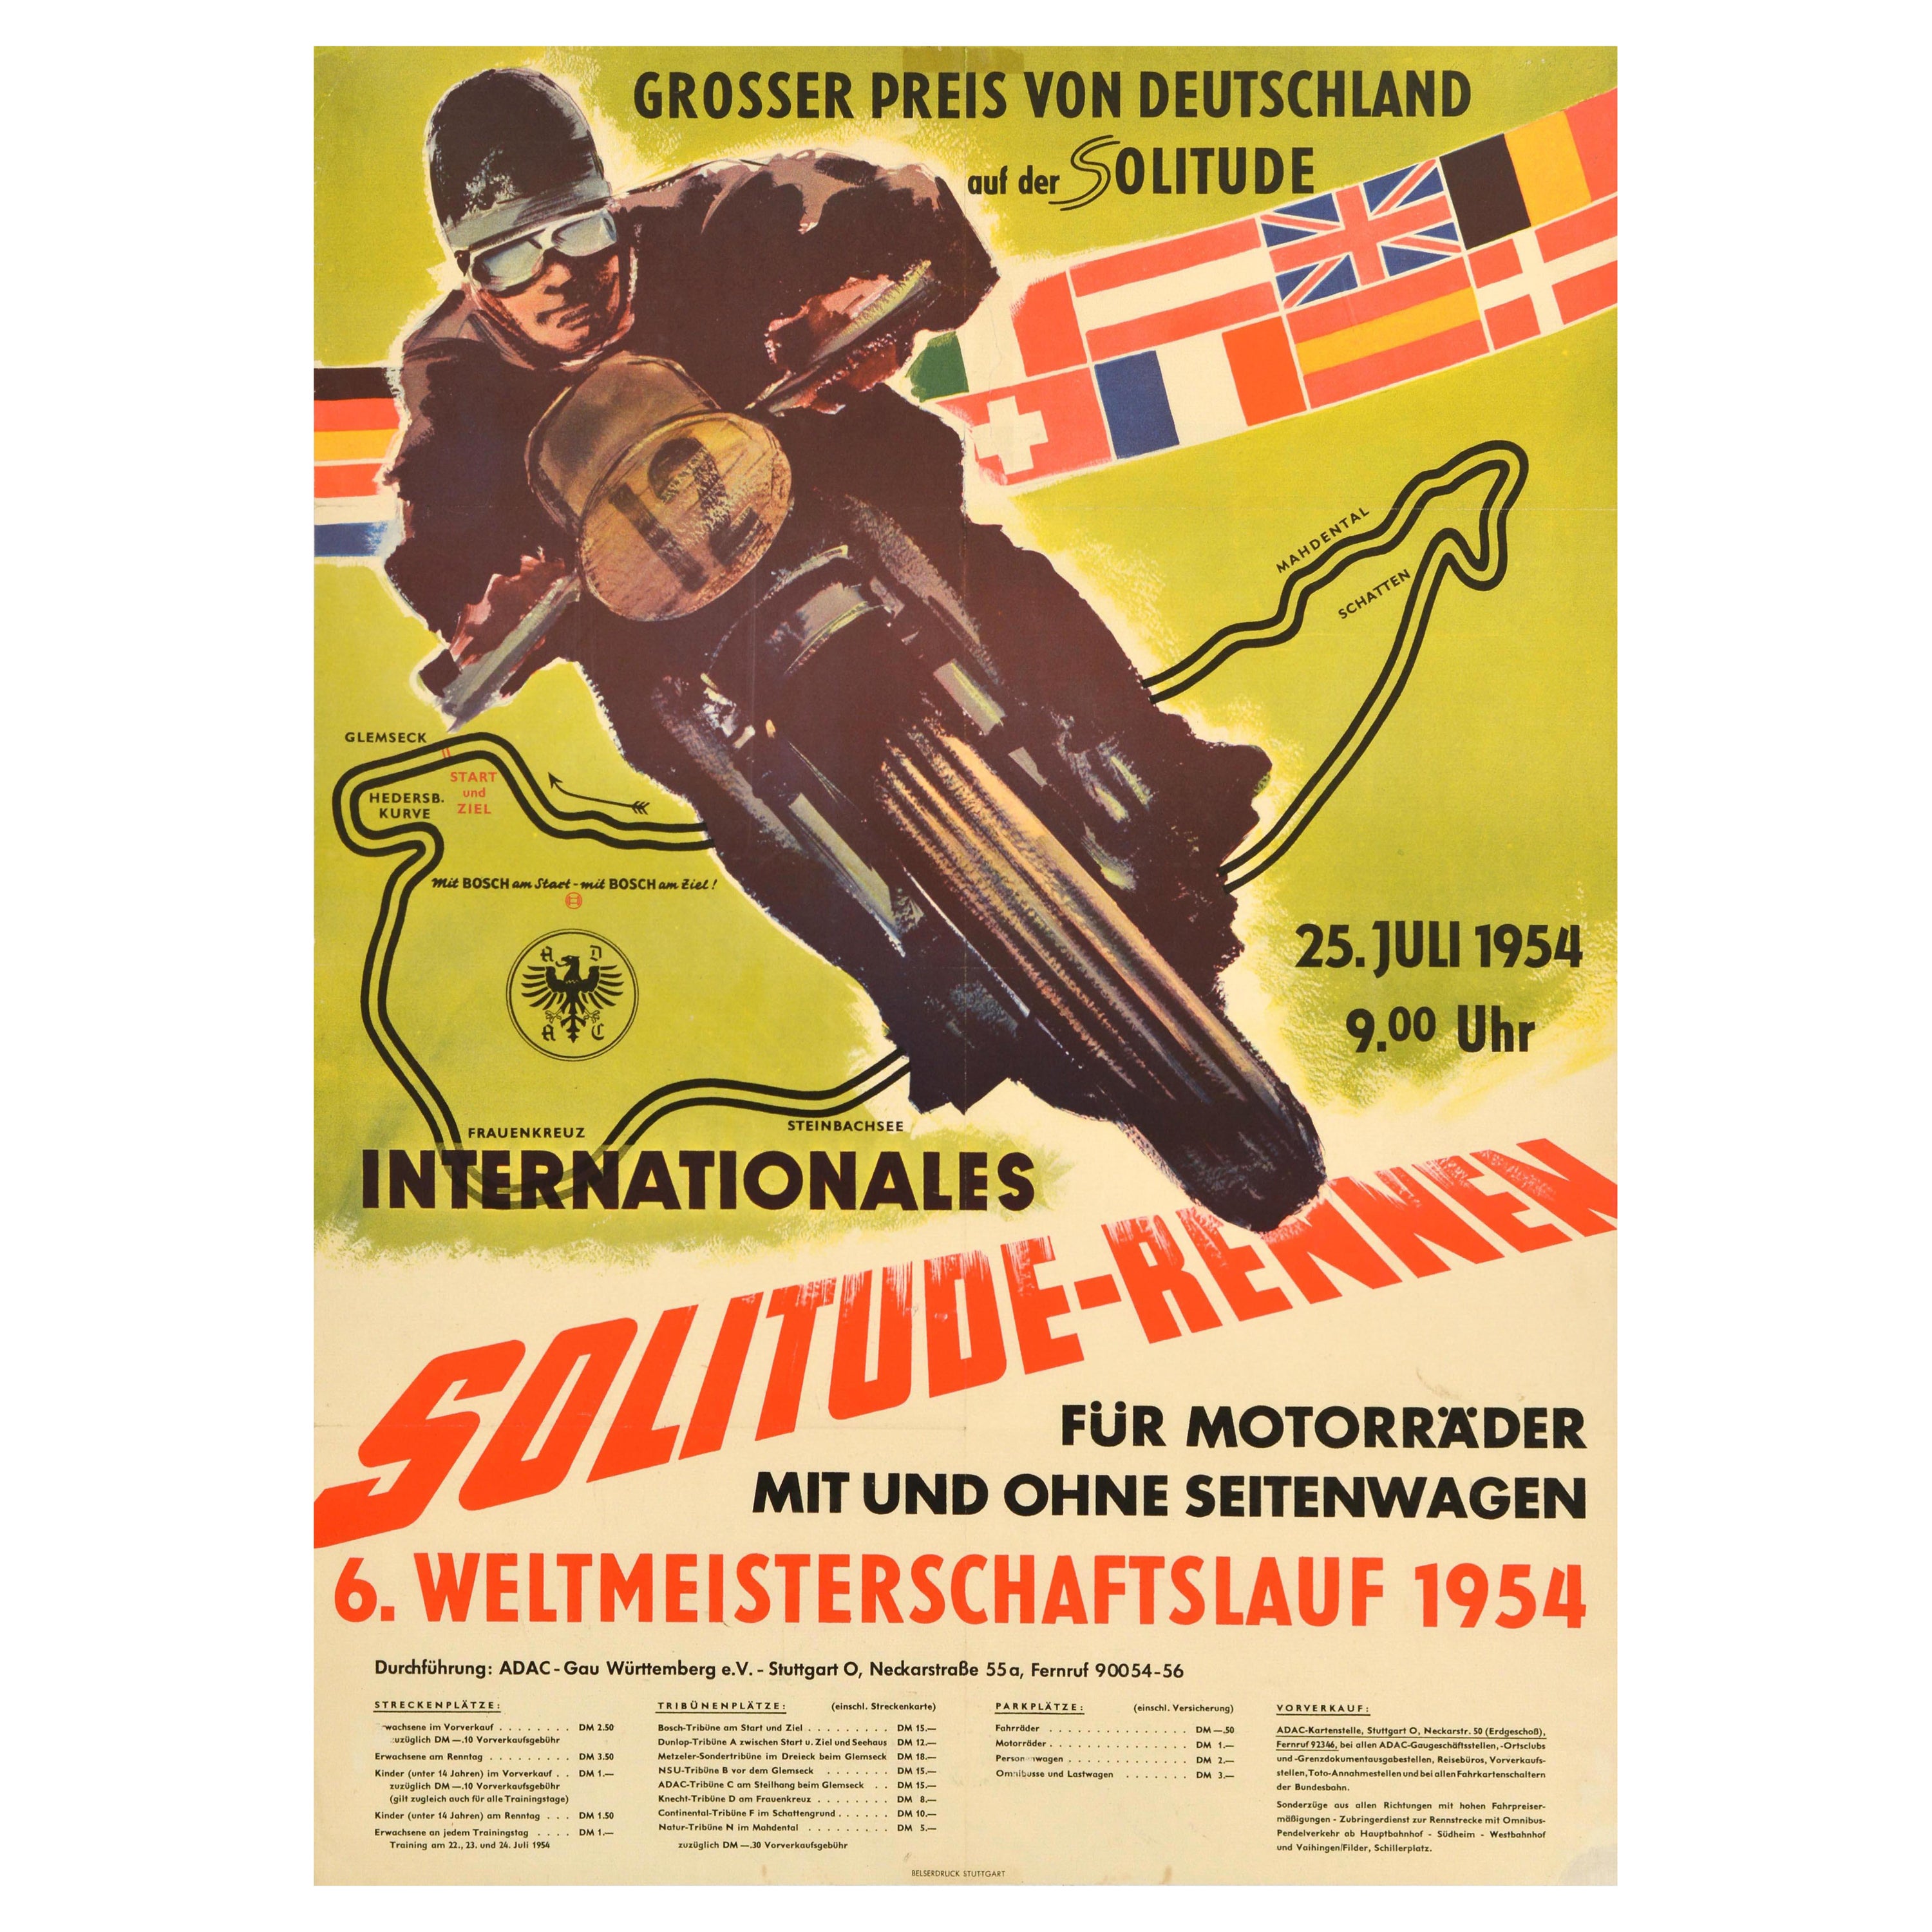 Retro Grand Prix Movie Poster - 60 x 40 Artist Signed and Numbered E –  The RACER Store